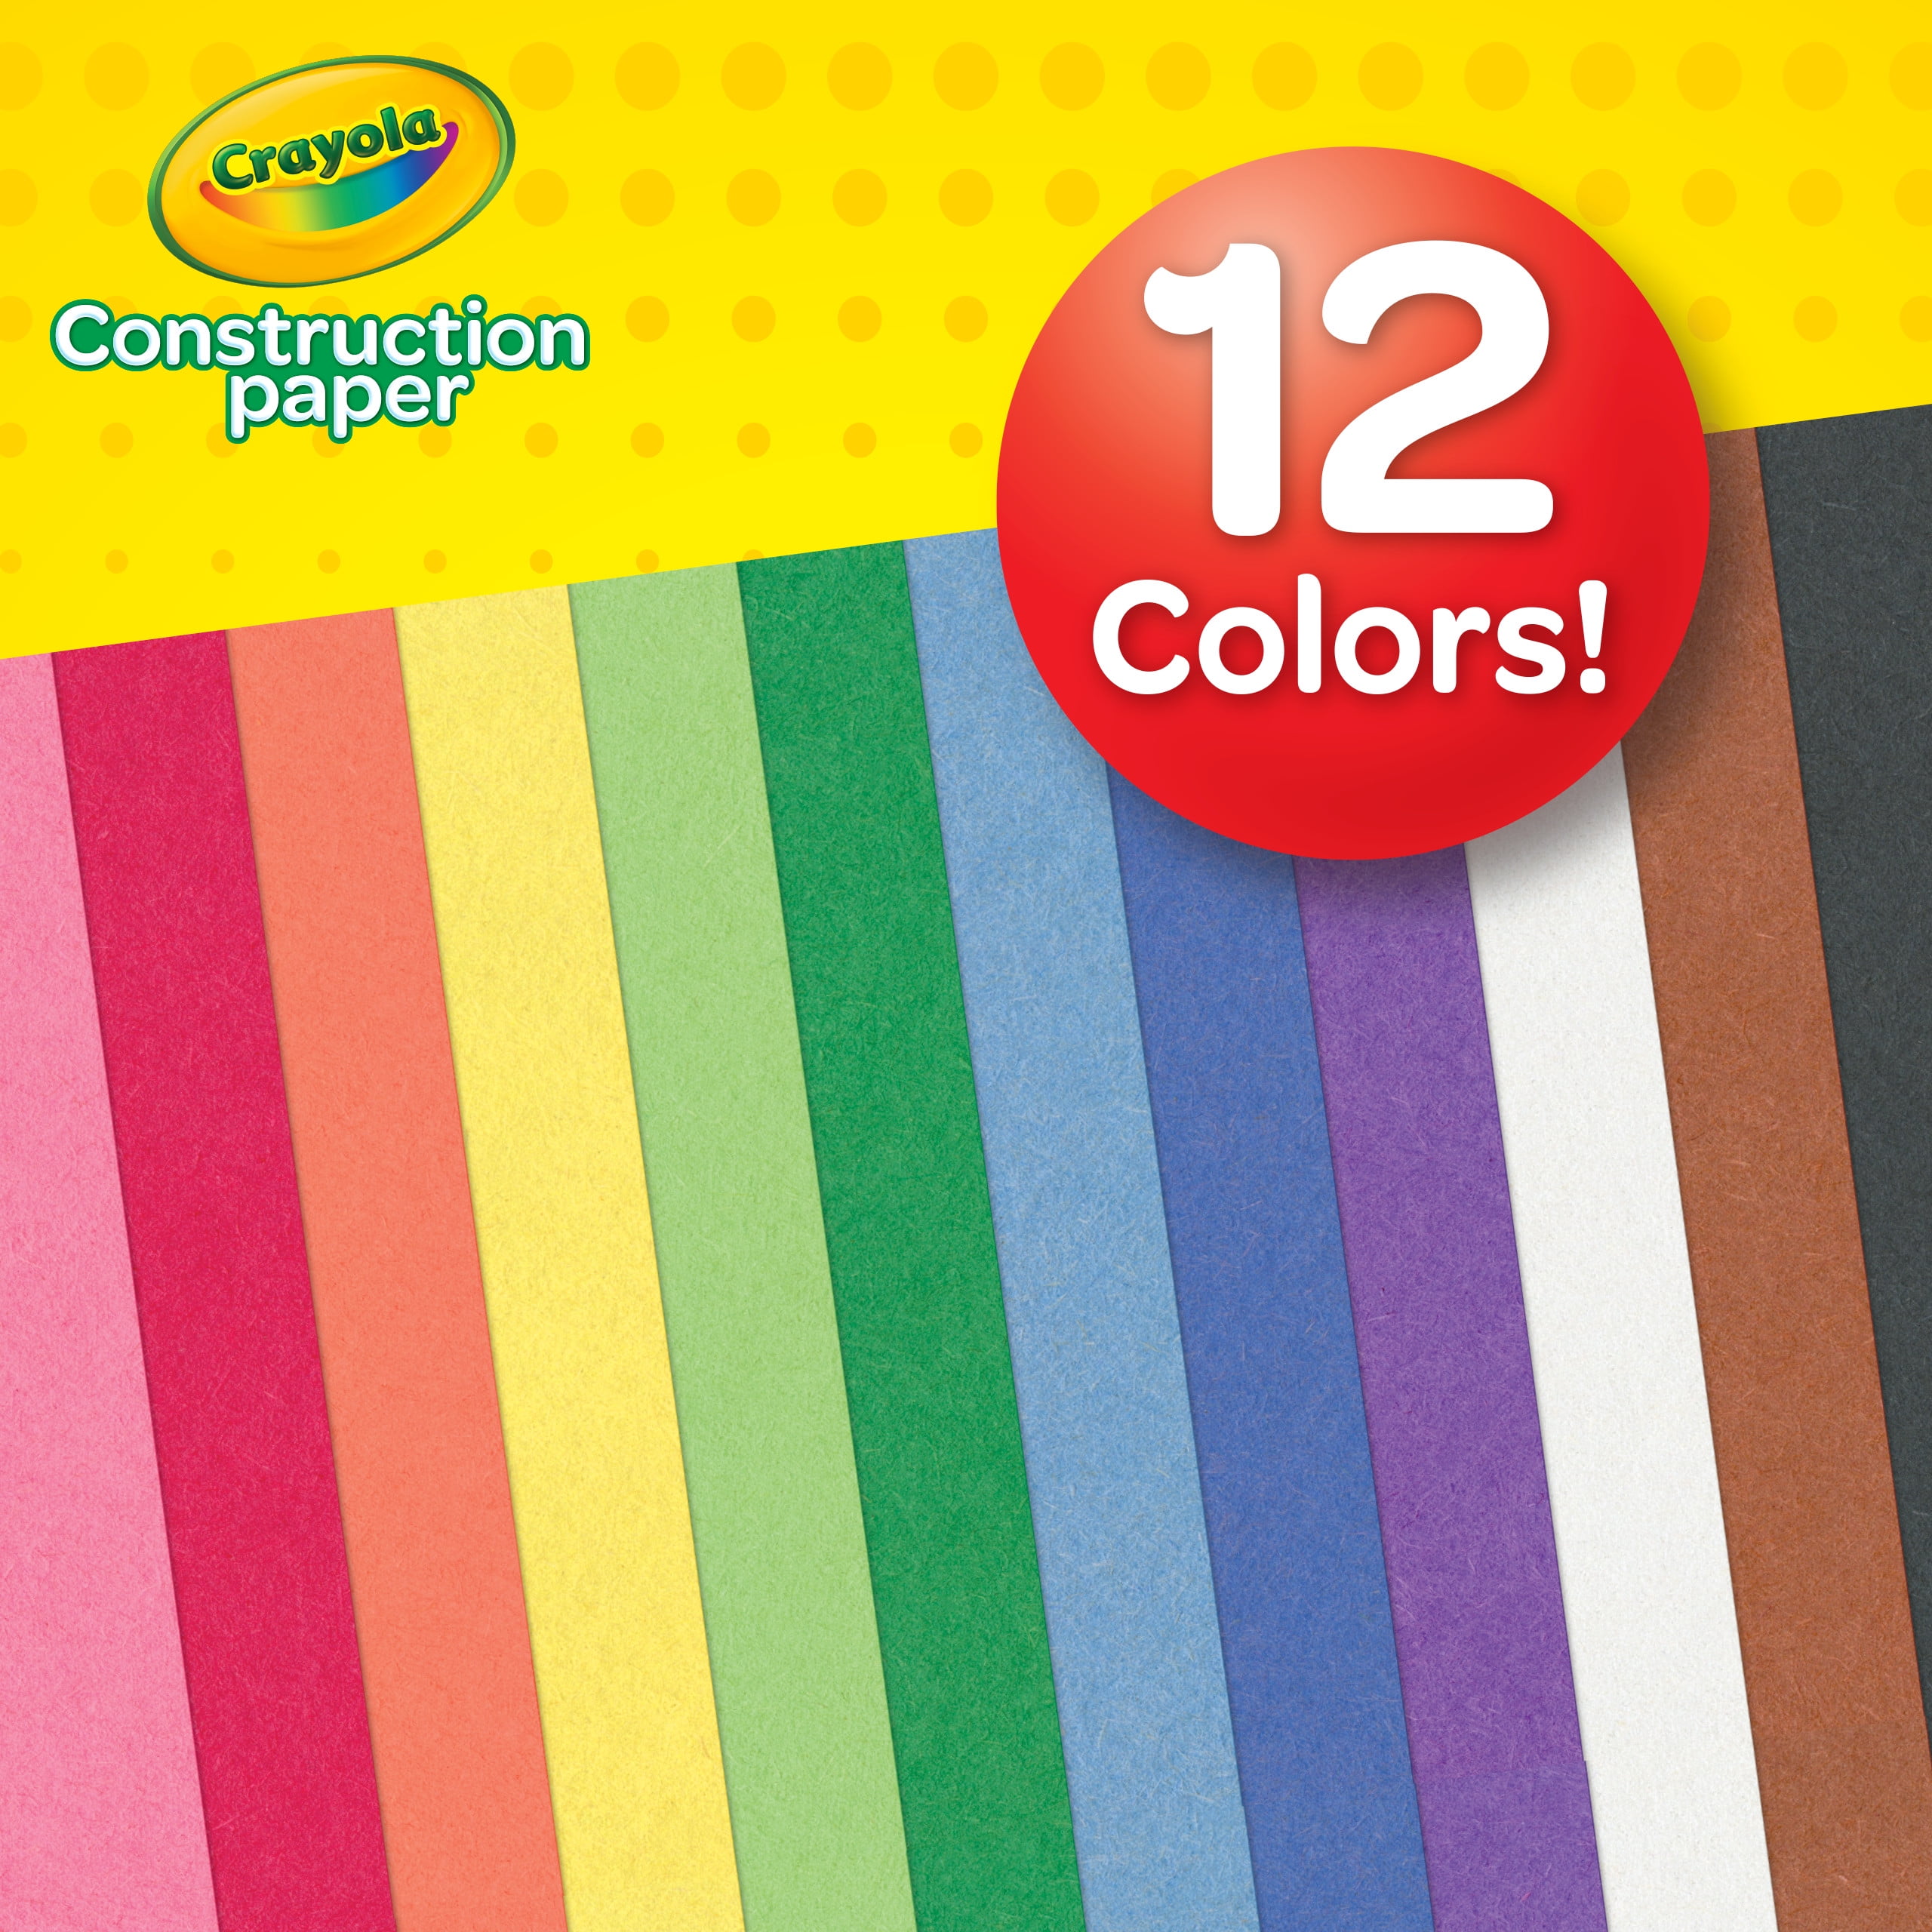 Crayola 12 Color Construction Paper, Assorted Colors, 240 Sheets